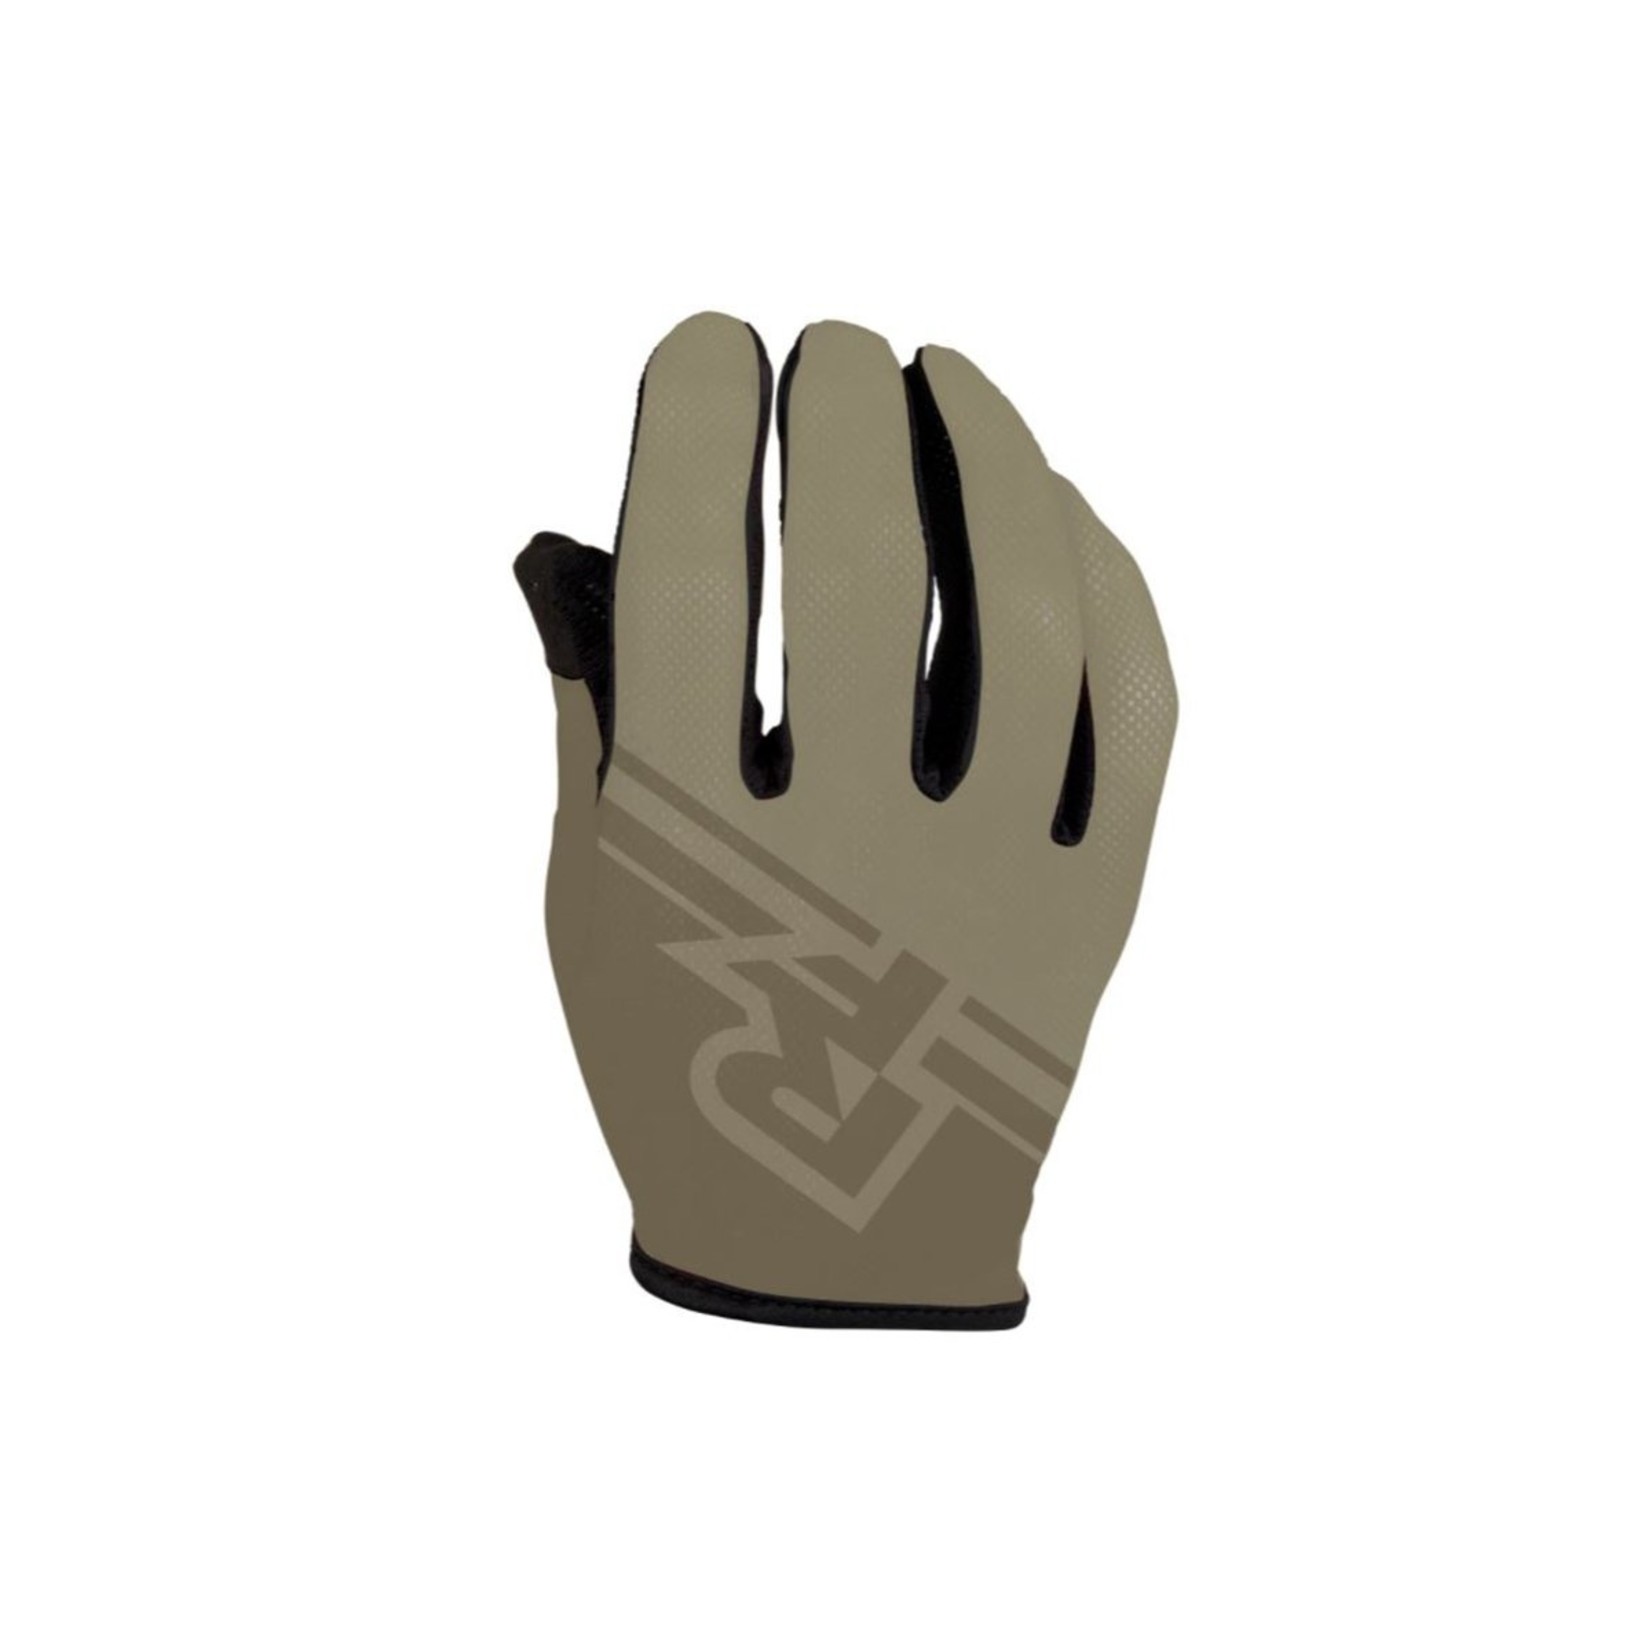 2021 Raceface Indy Glove